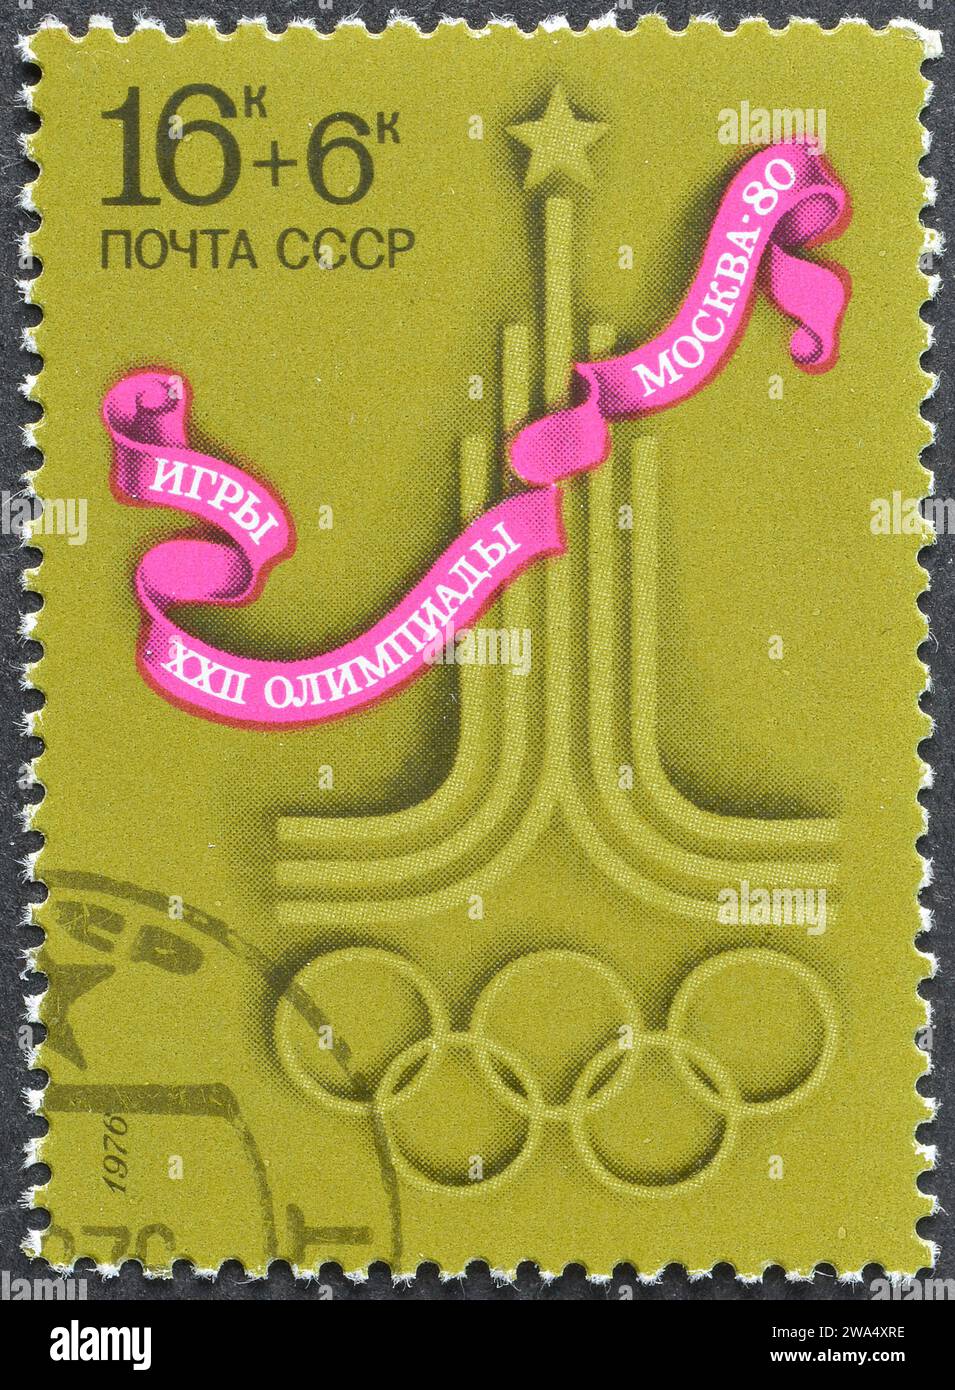 Cancelled postage stamp printed by Soviet Union, that shows Moscow 1980 Olympic Games Emblem, circa 1976. Stock Photo